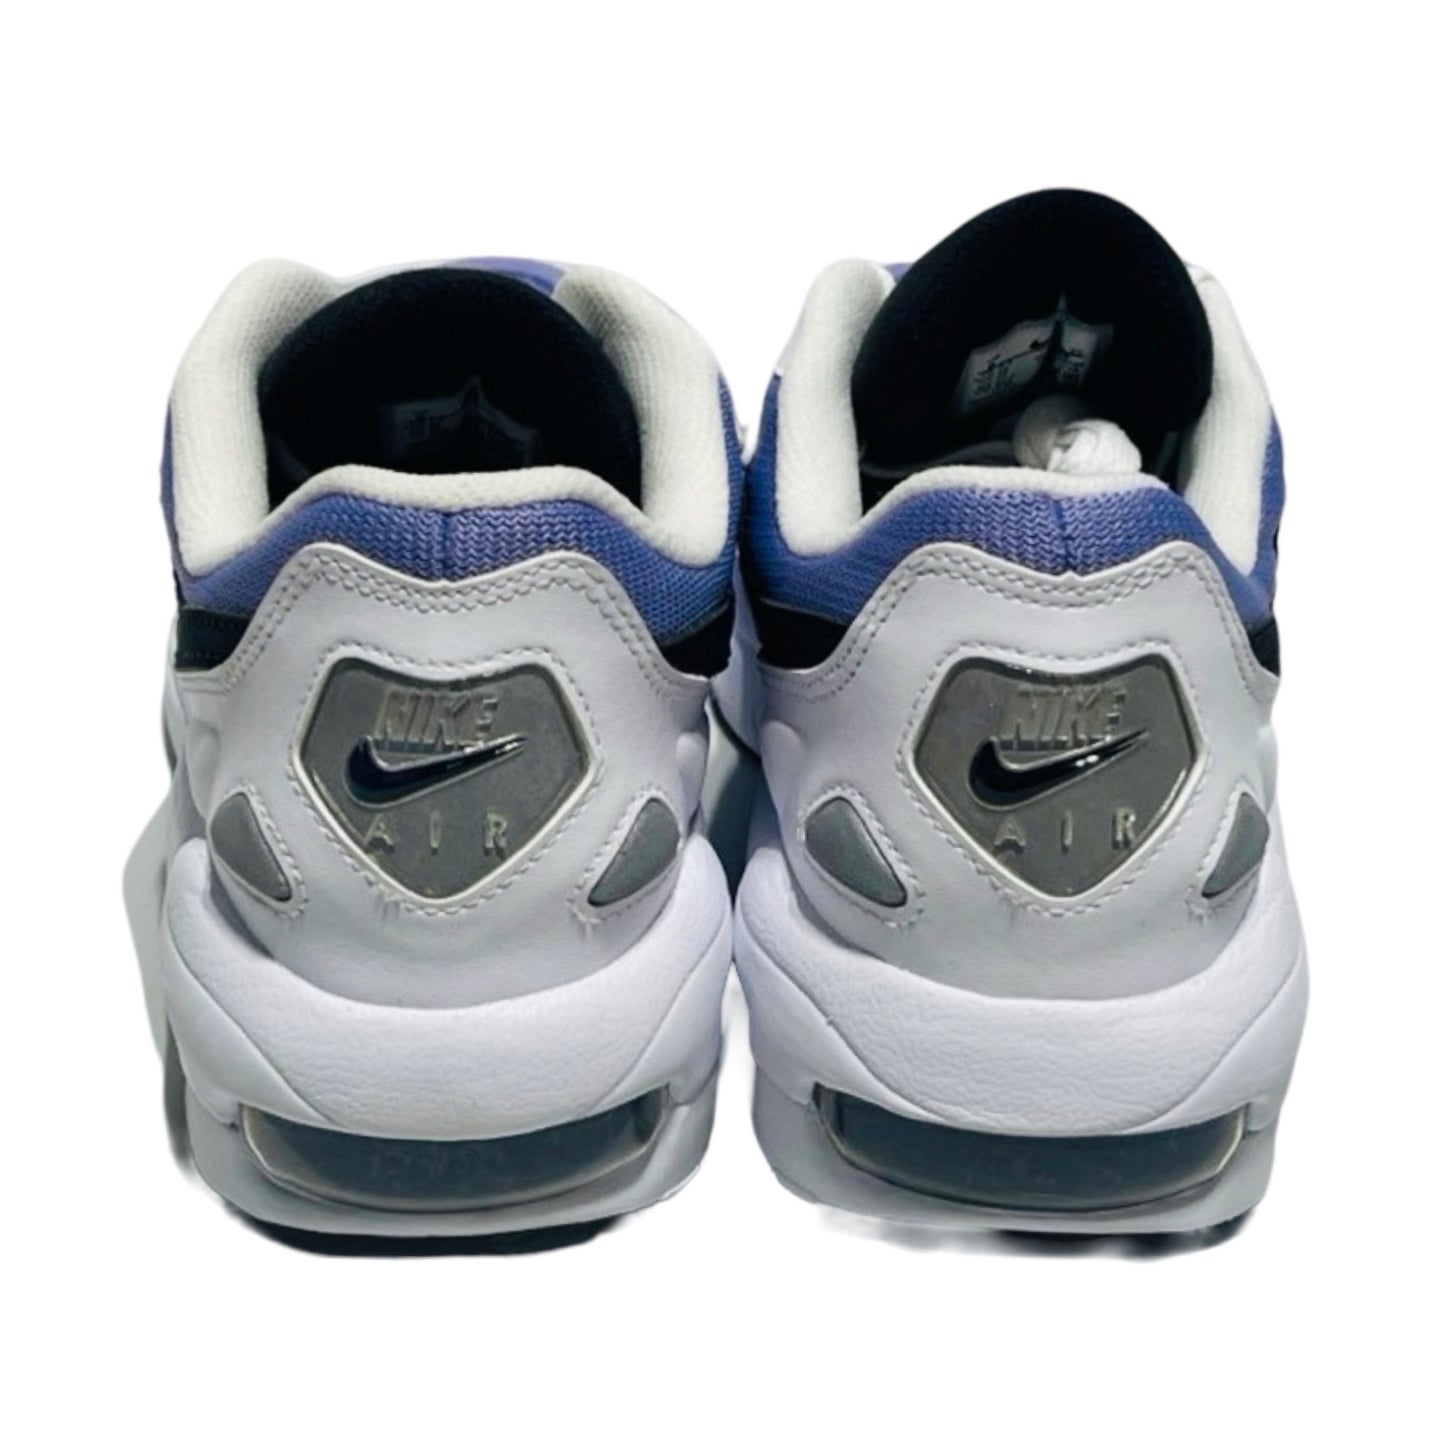 Air Max2 Light White/Black Medium Violet Shoes Athletic By Nike  Size: 8